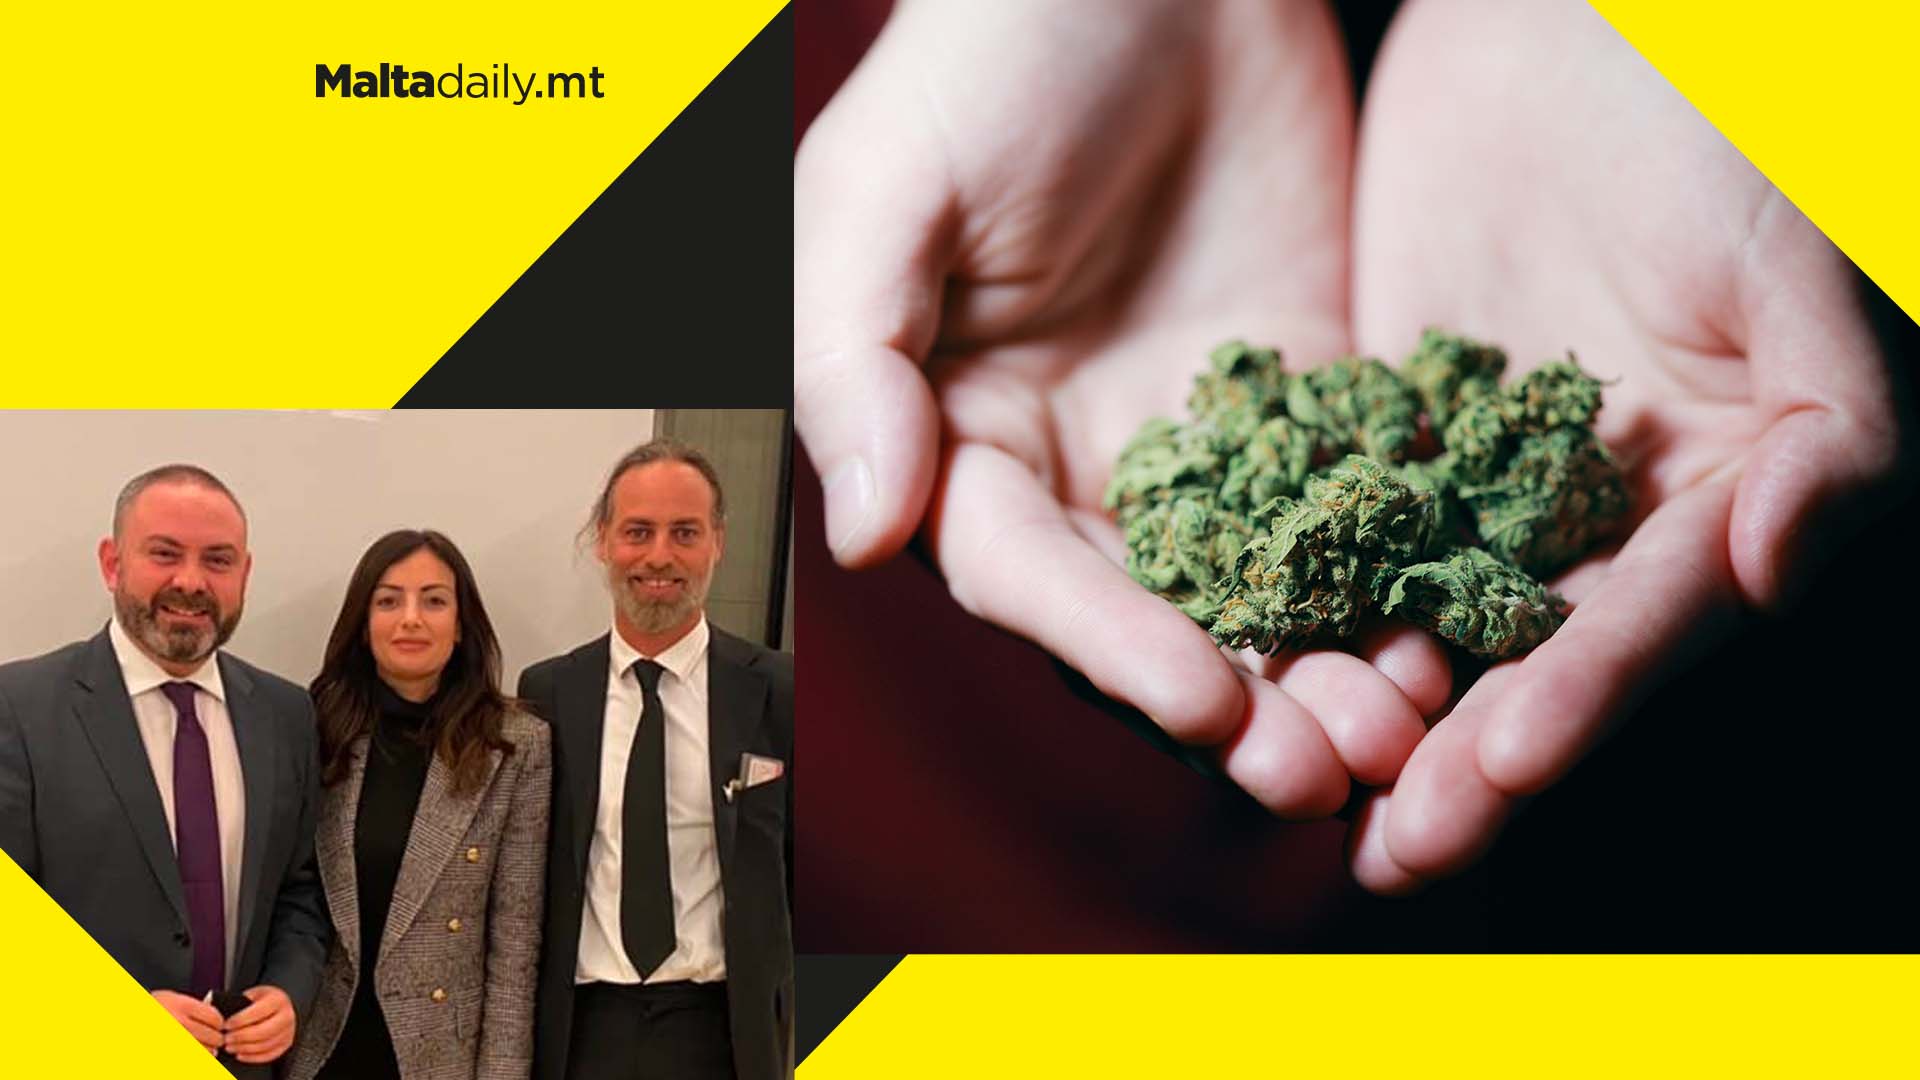 Malta's Cannabis Reform Bill enters final stage as Opposition proposes no amendments